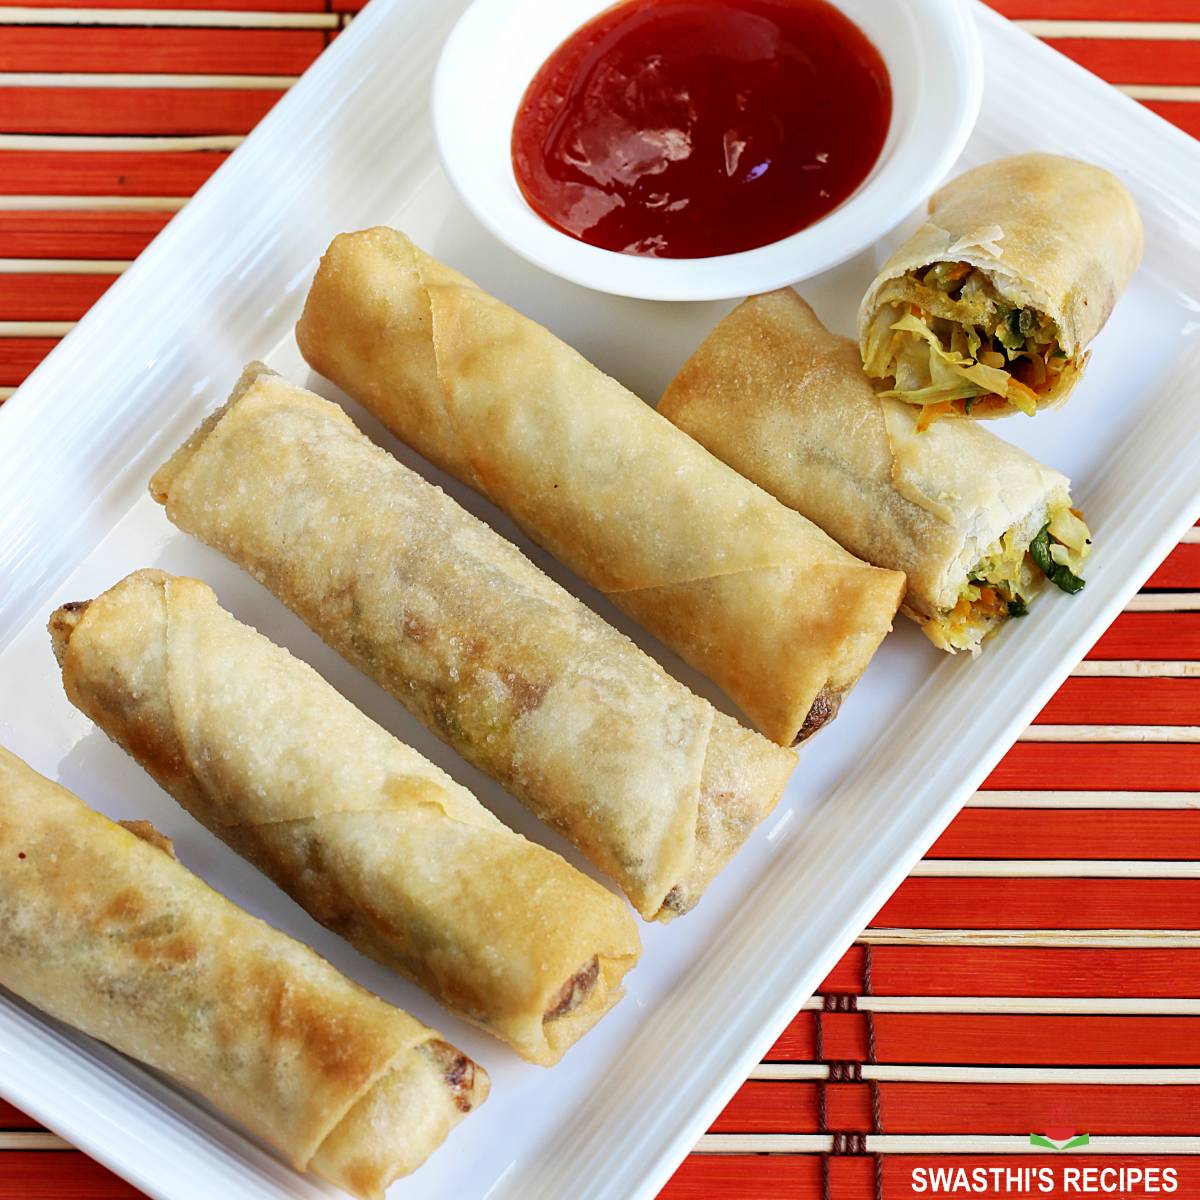 Spring Roll Recipe, Vegetable Spring Rolls   Swasthi's Recipes